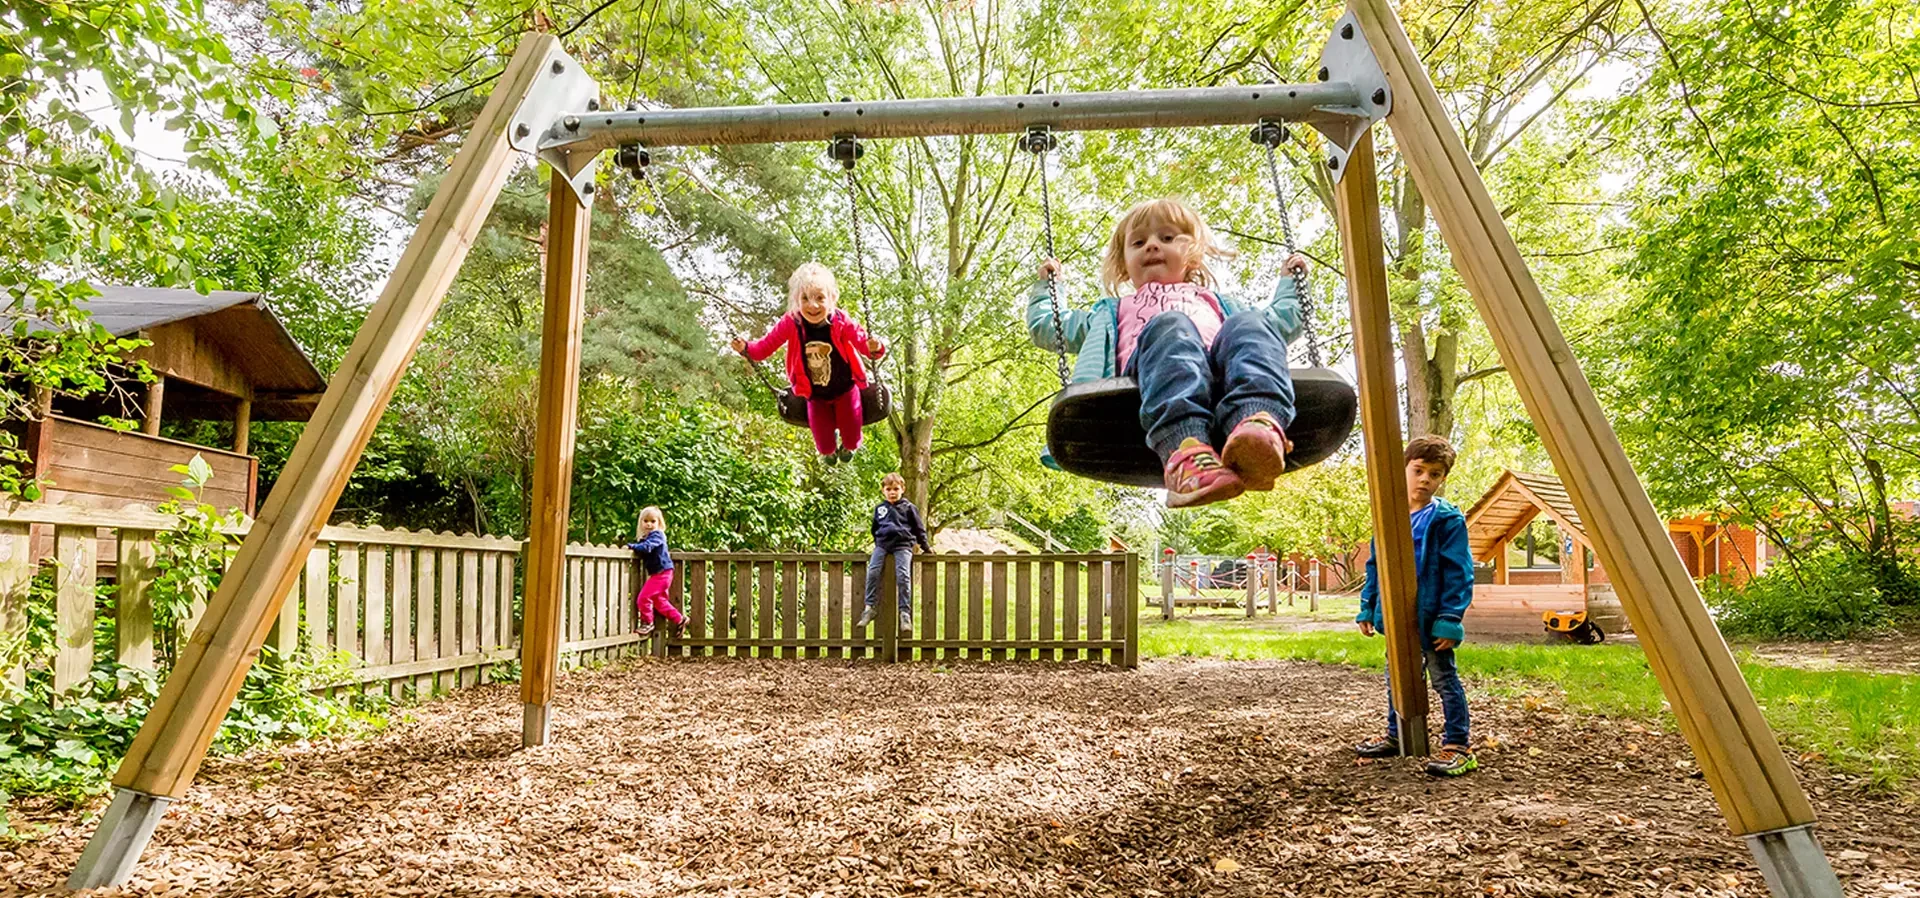 children on a classic playground equipment swing in a park